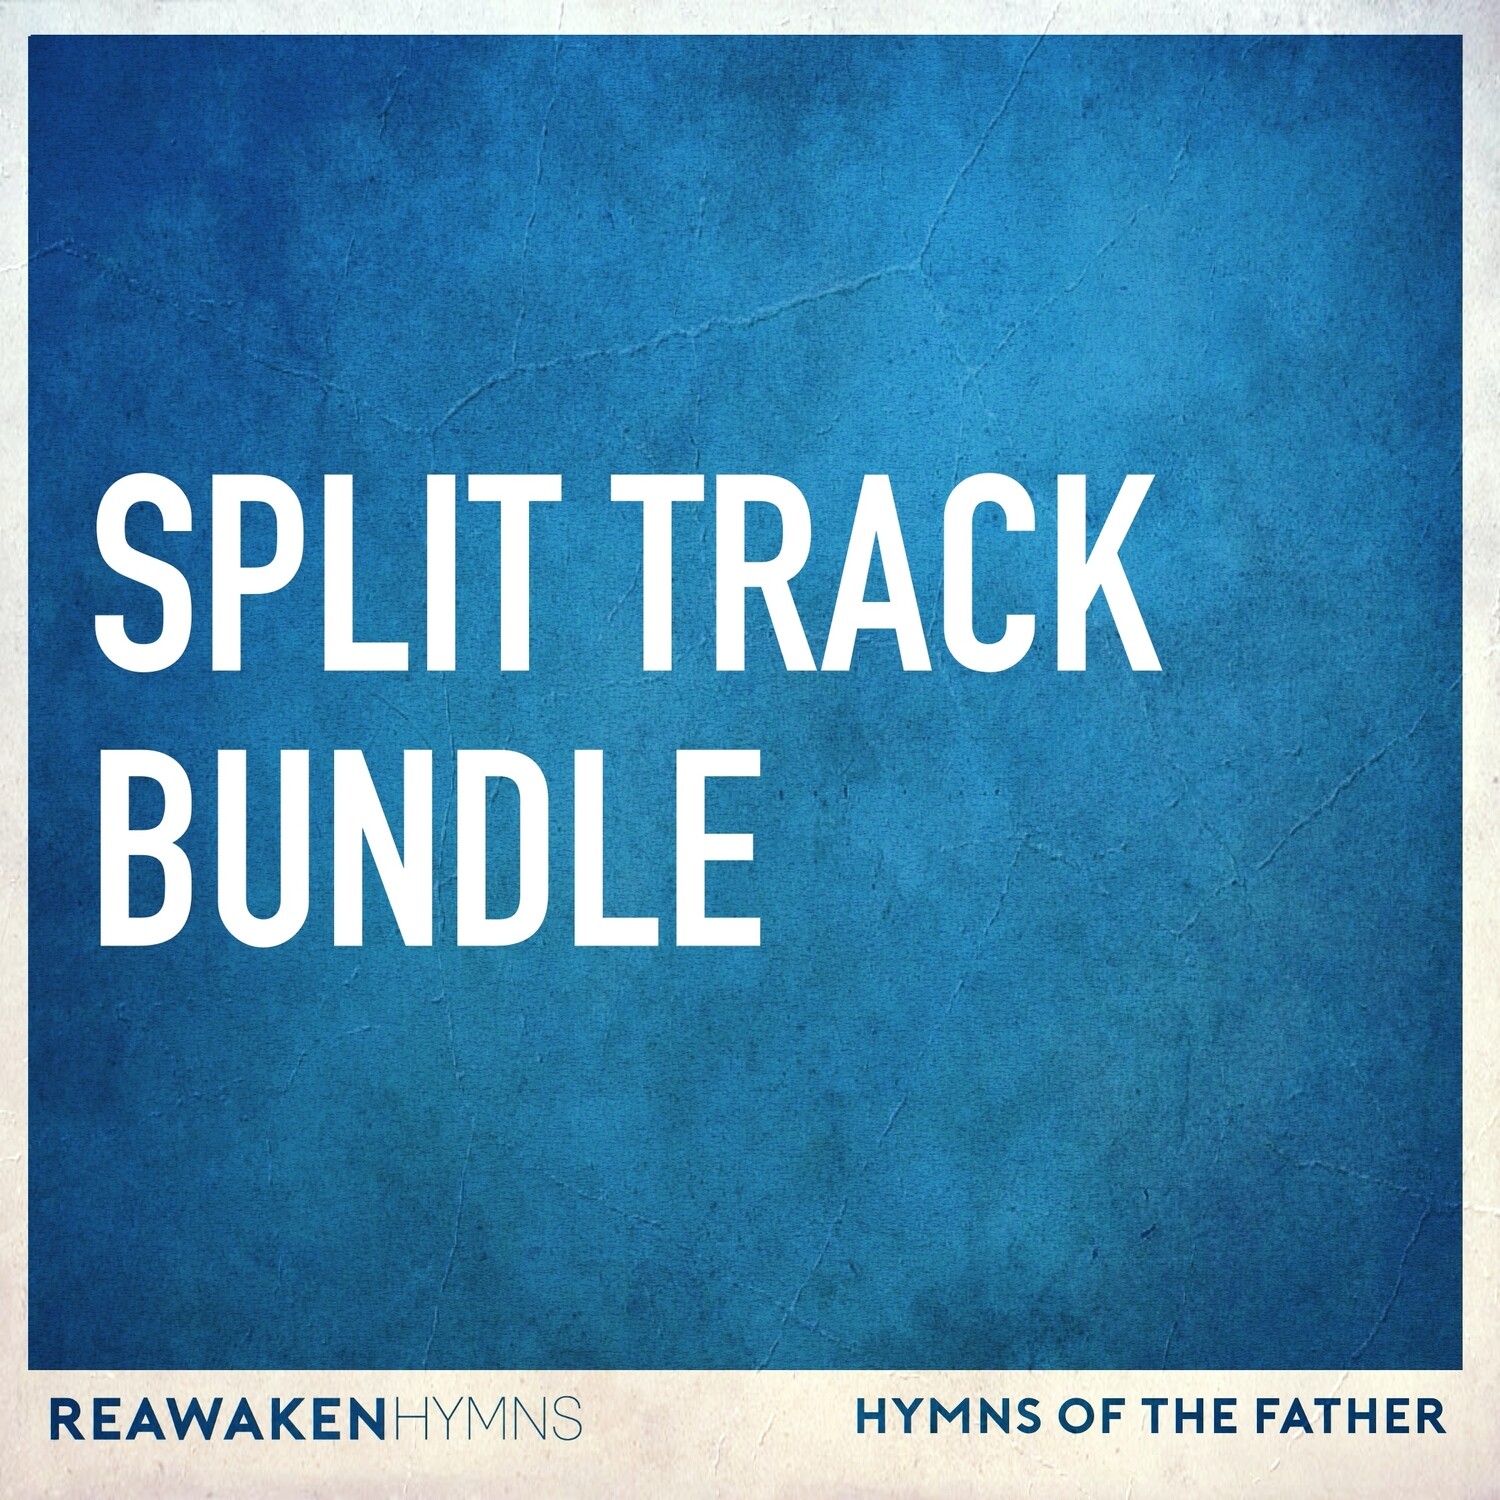 Hymns of the Father Split Track Bundle